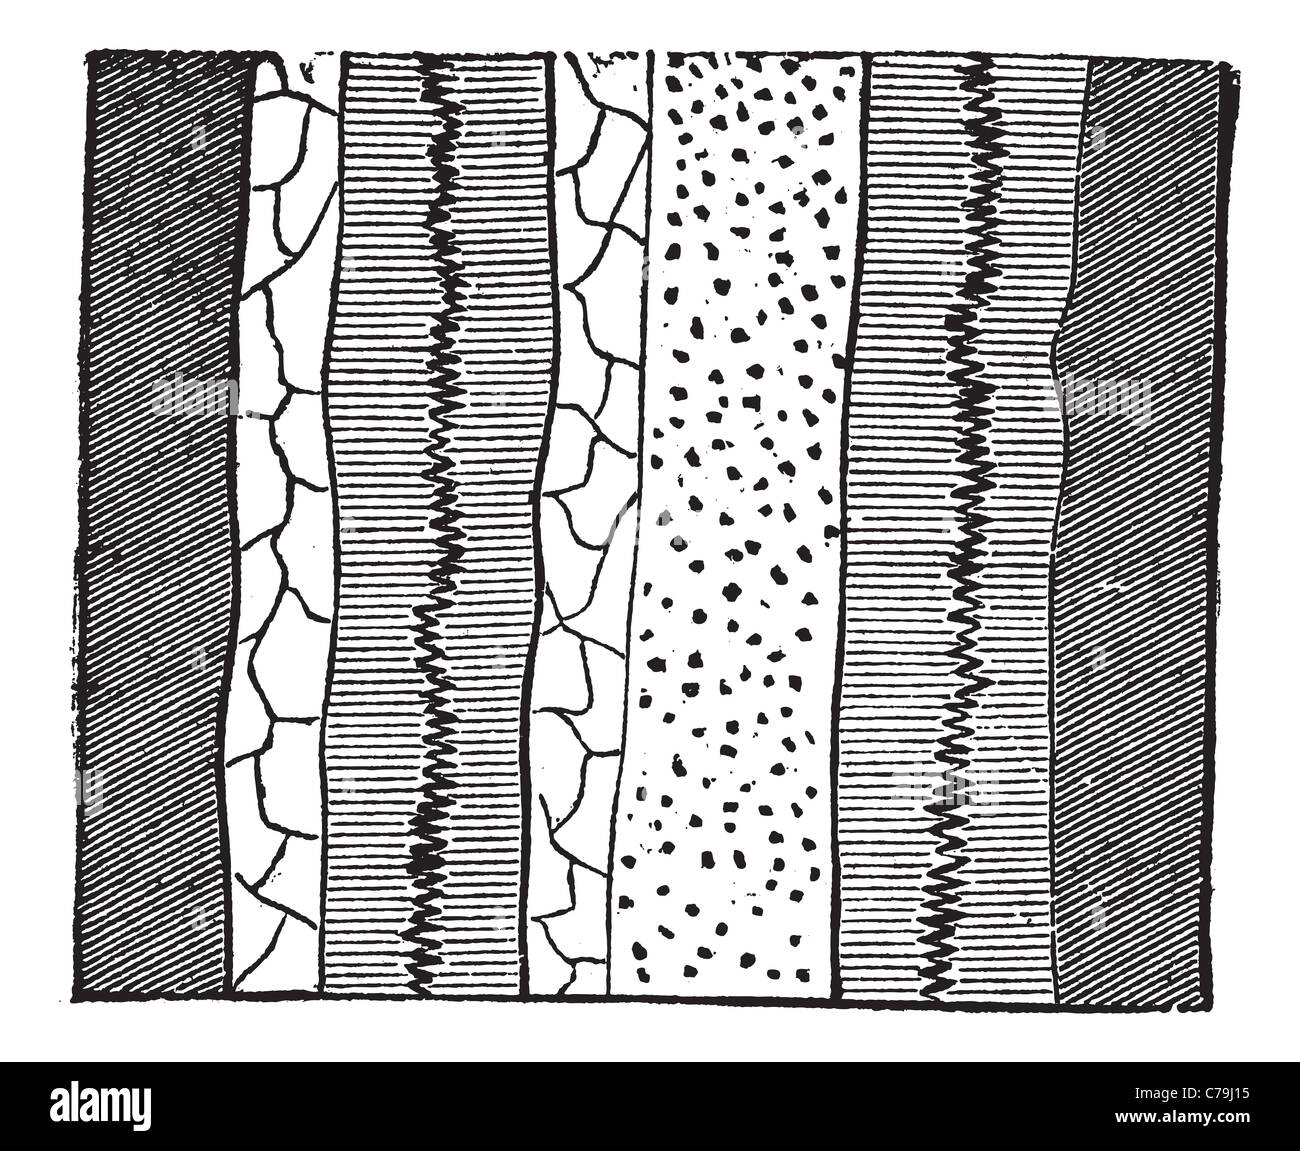 Geological Vein, illustration showing two veins splitting two separate layers of quartz into four portions. Stock Photo